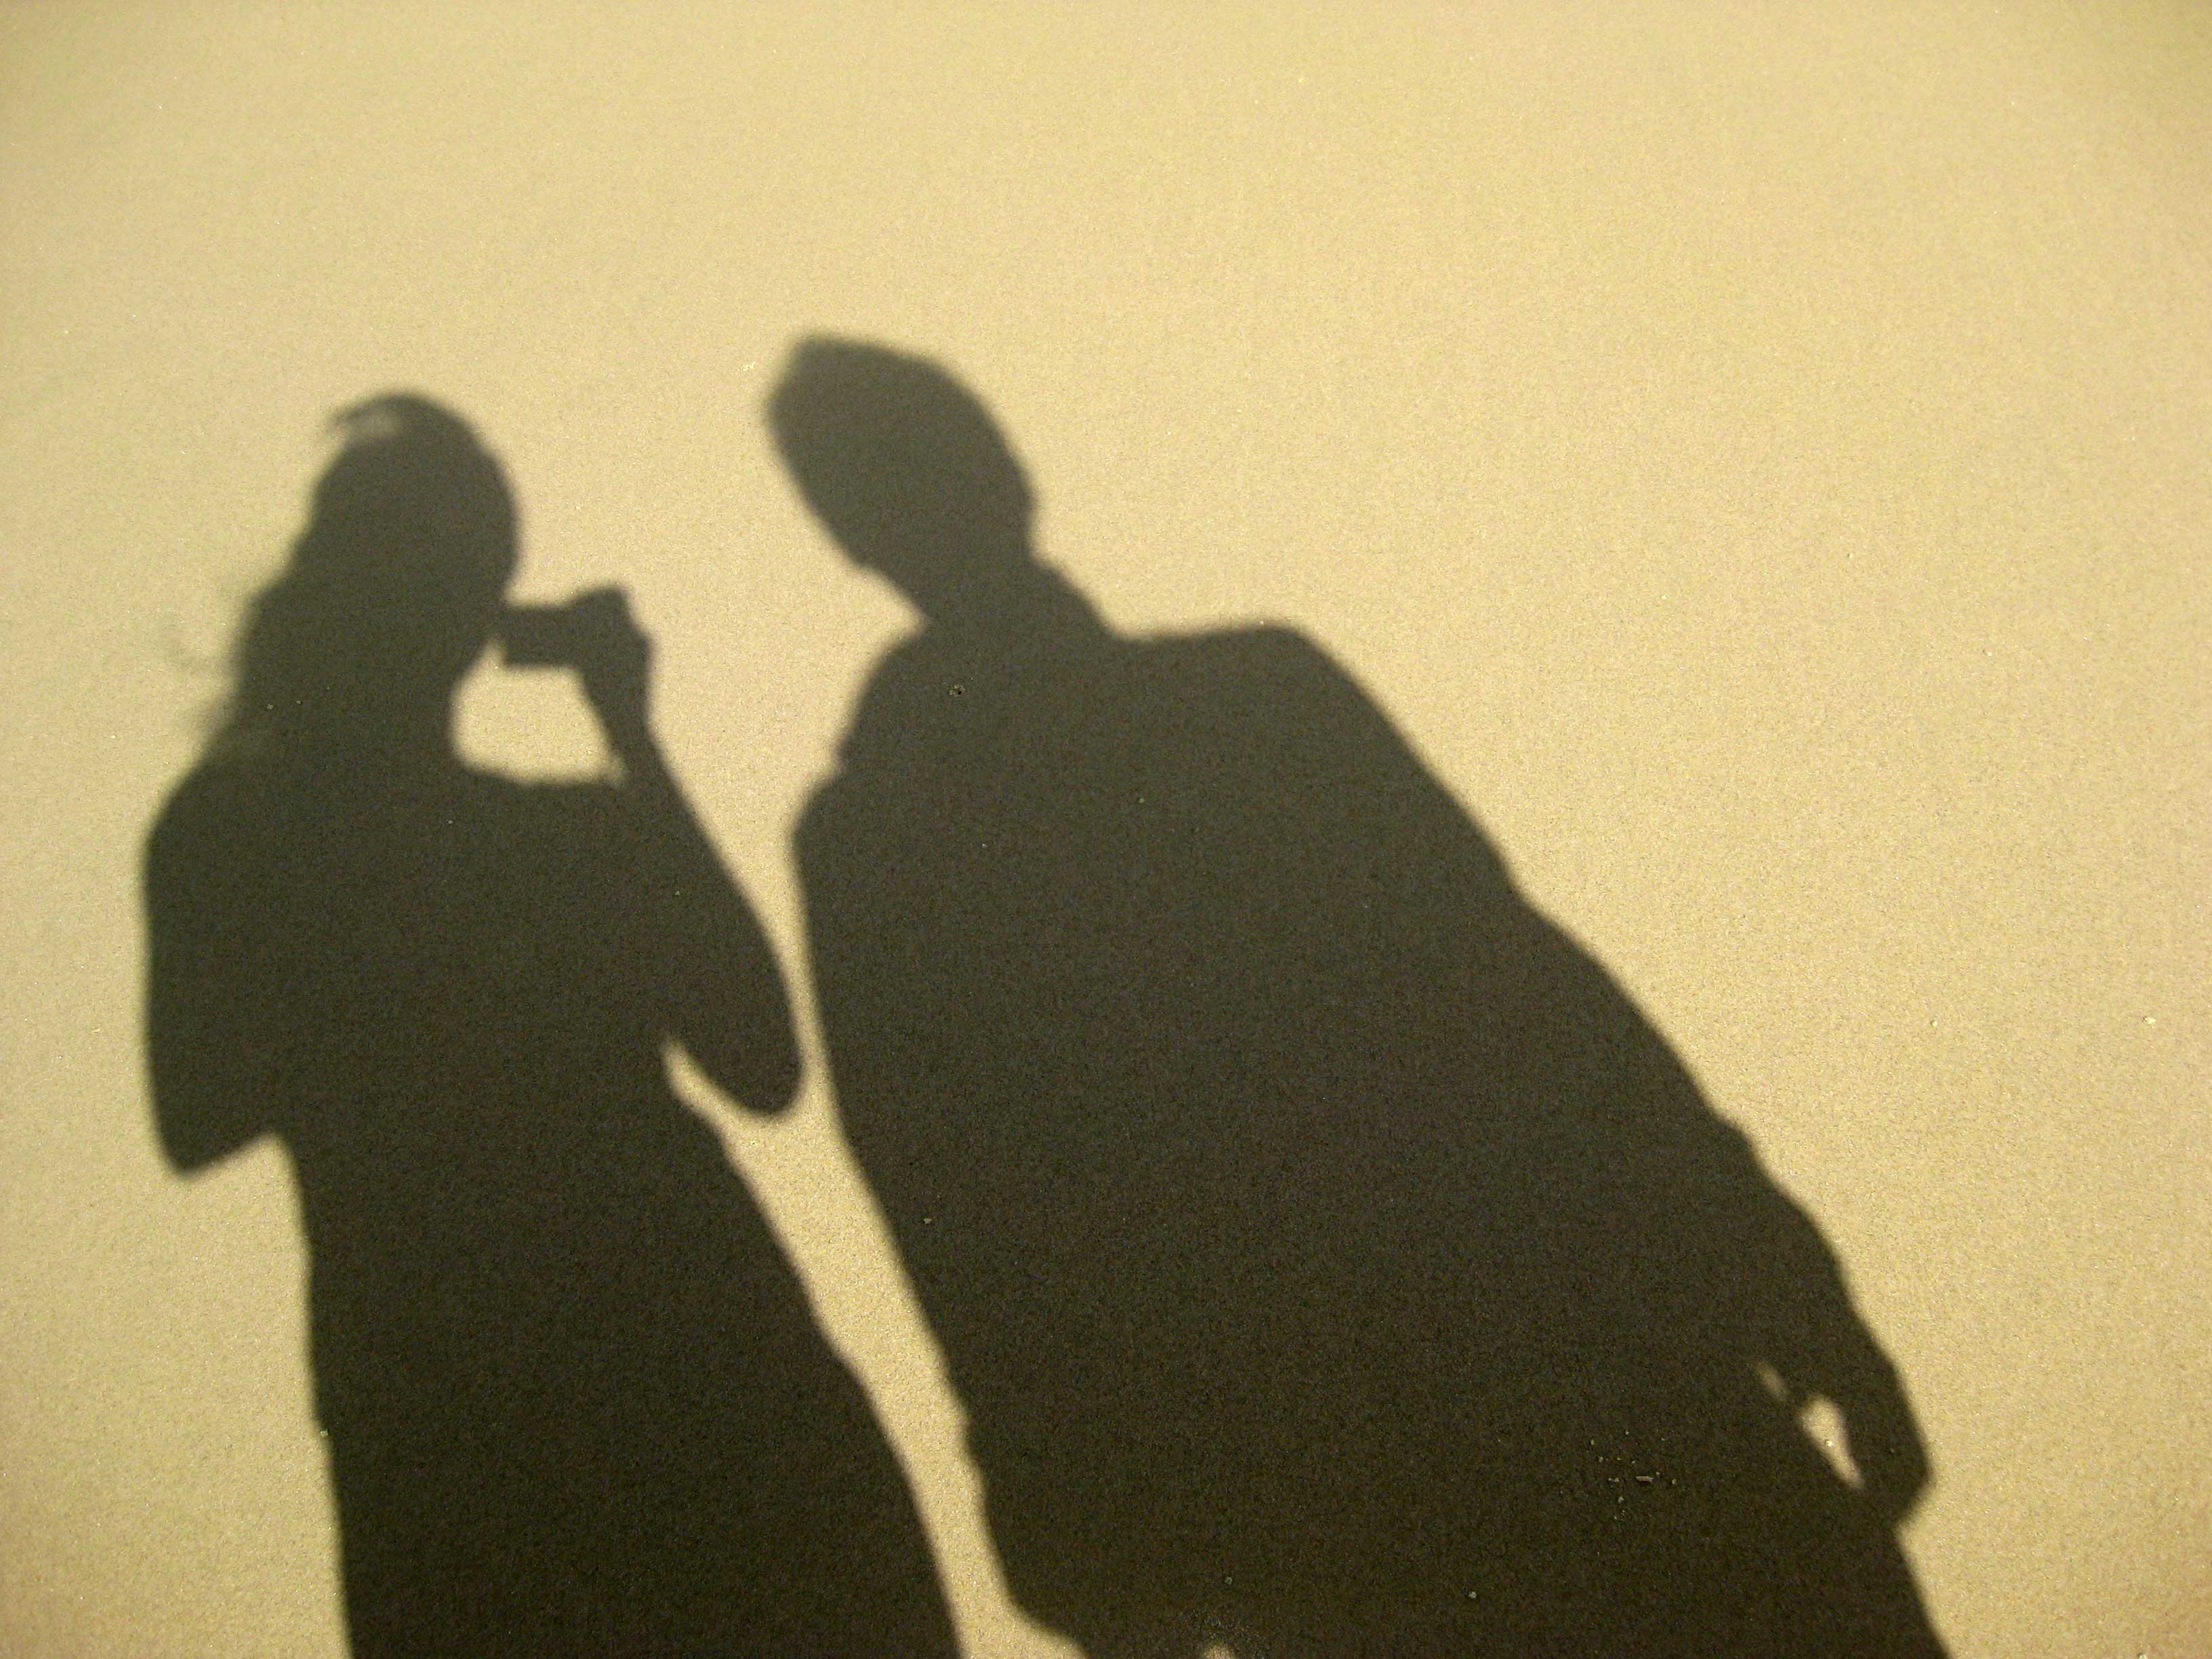 shadow image of you and your brother in sand while you travel with your brother